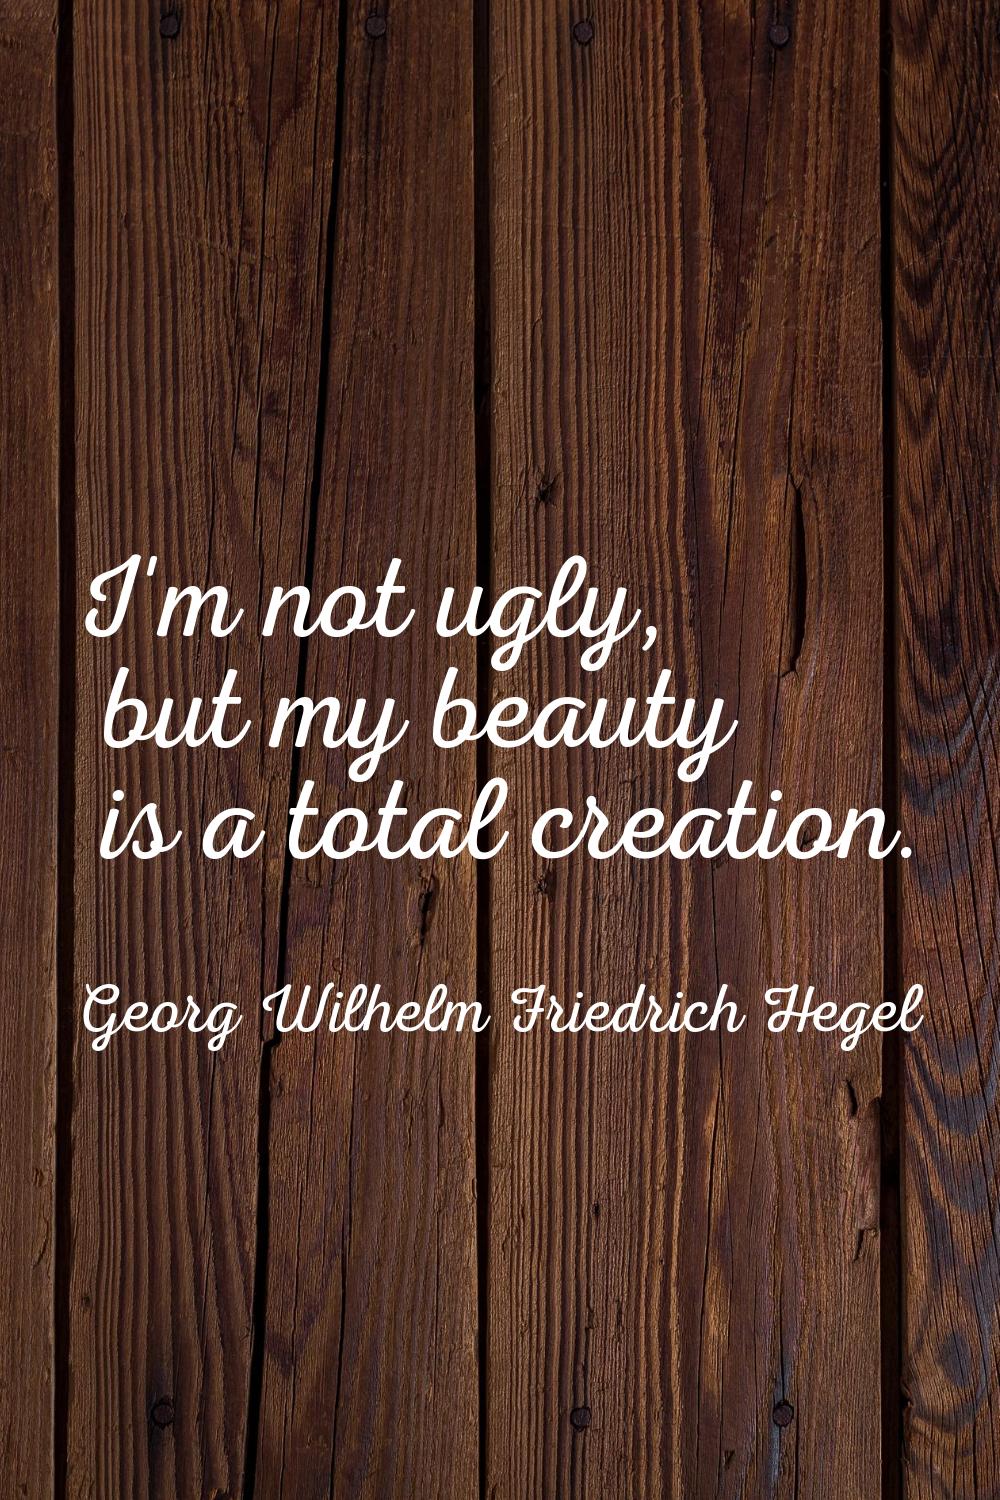 I'm not ugly, but my beauty is a total creation.